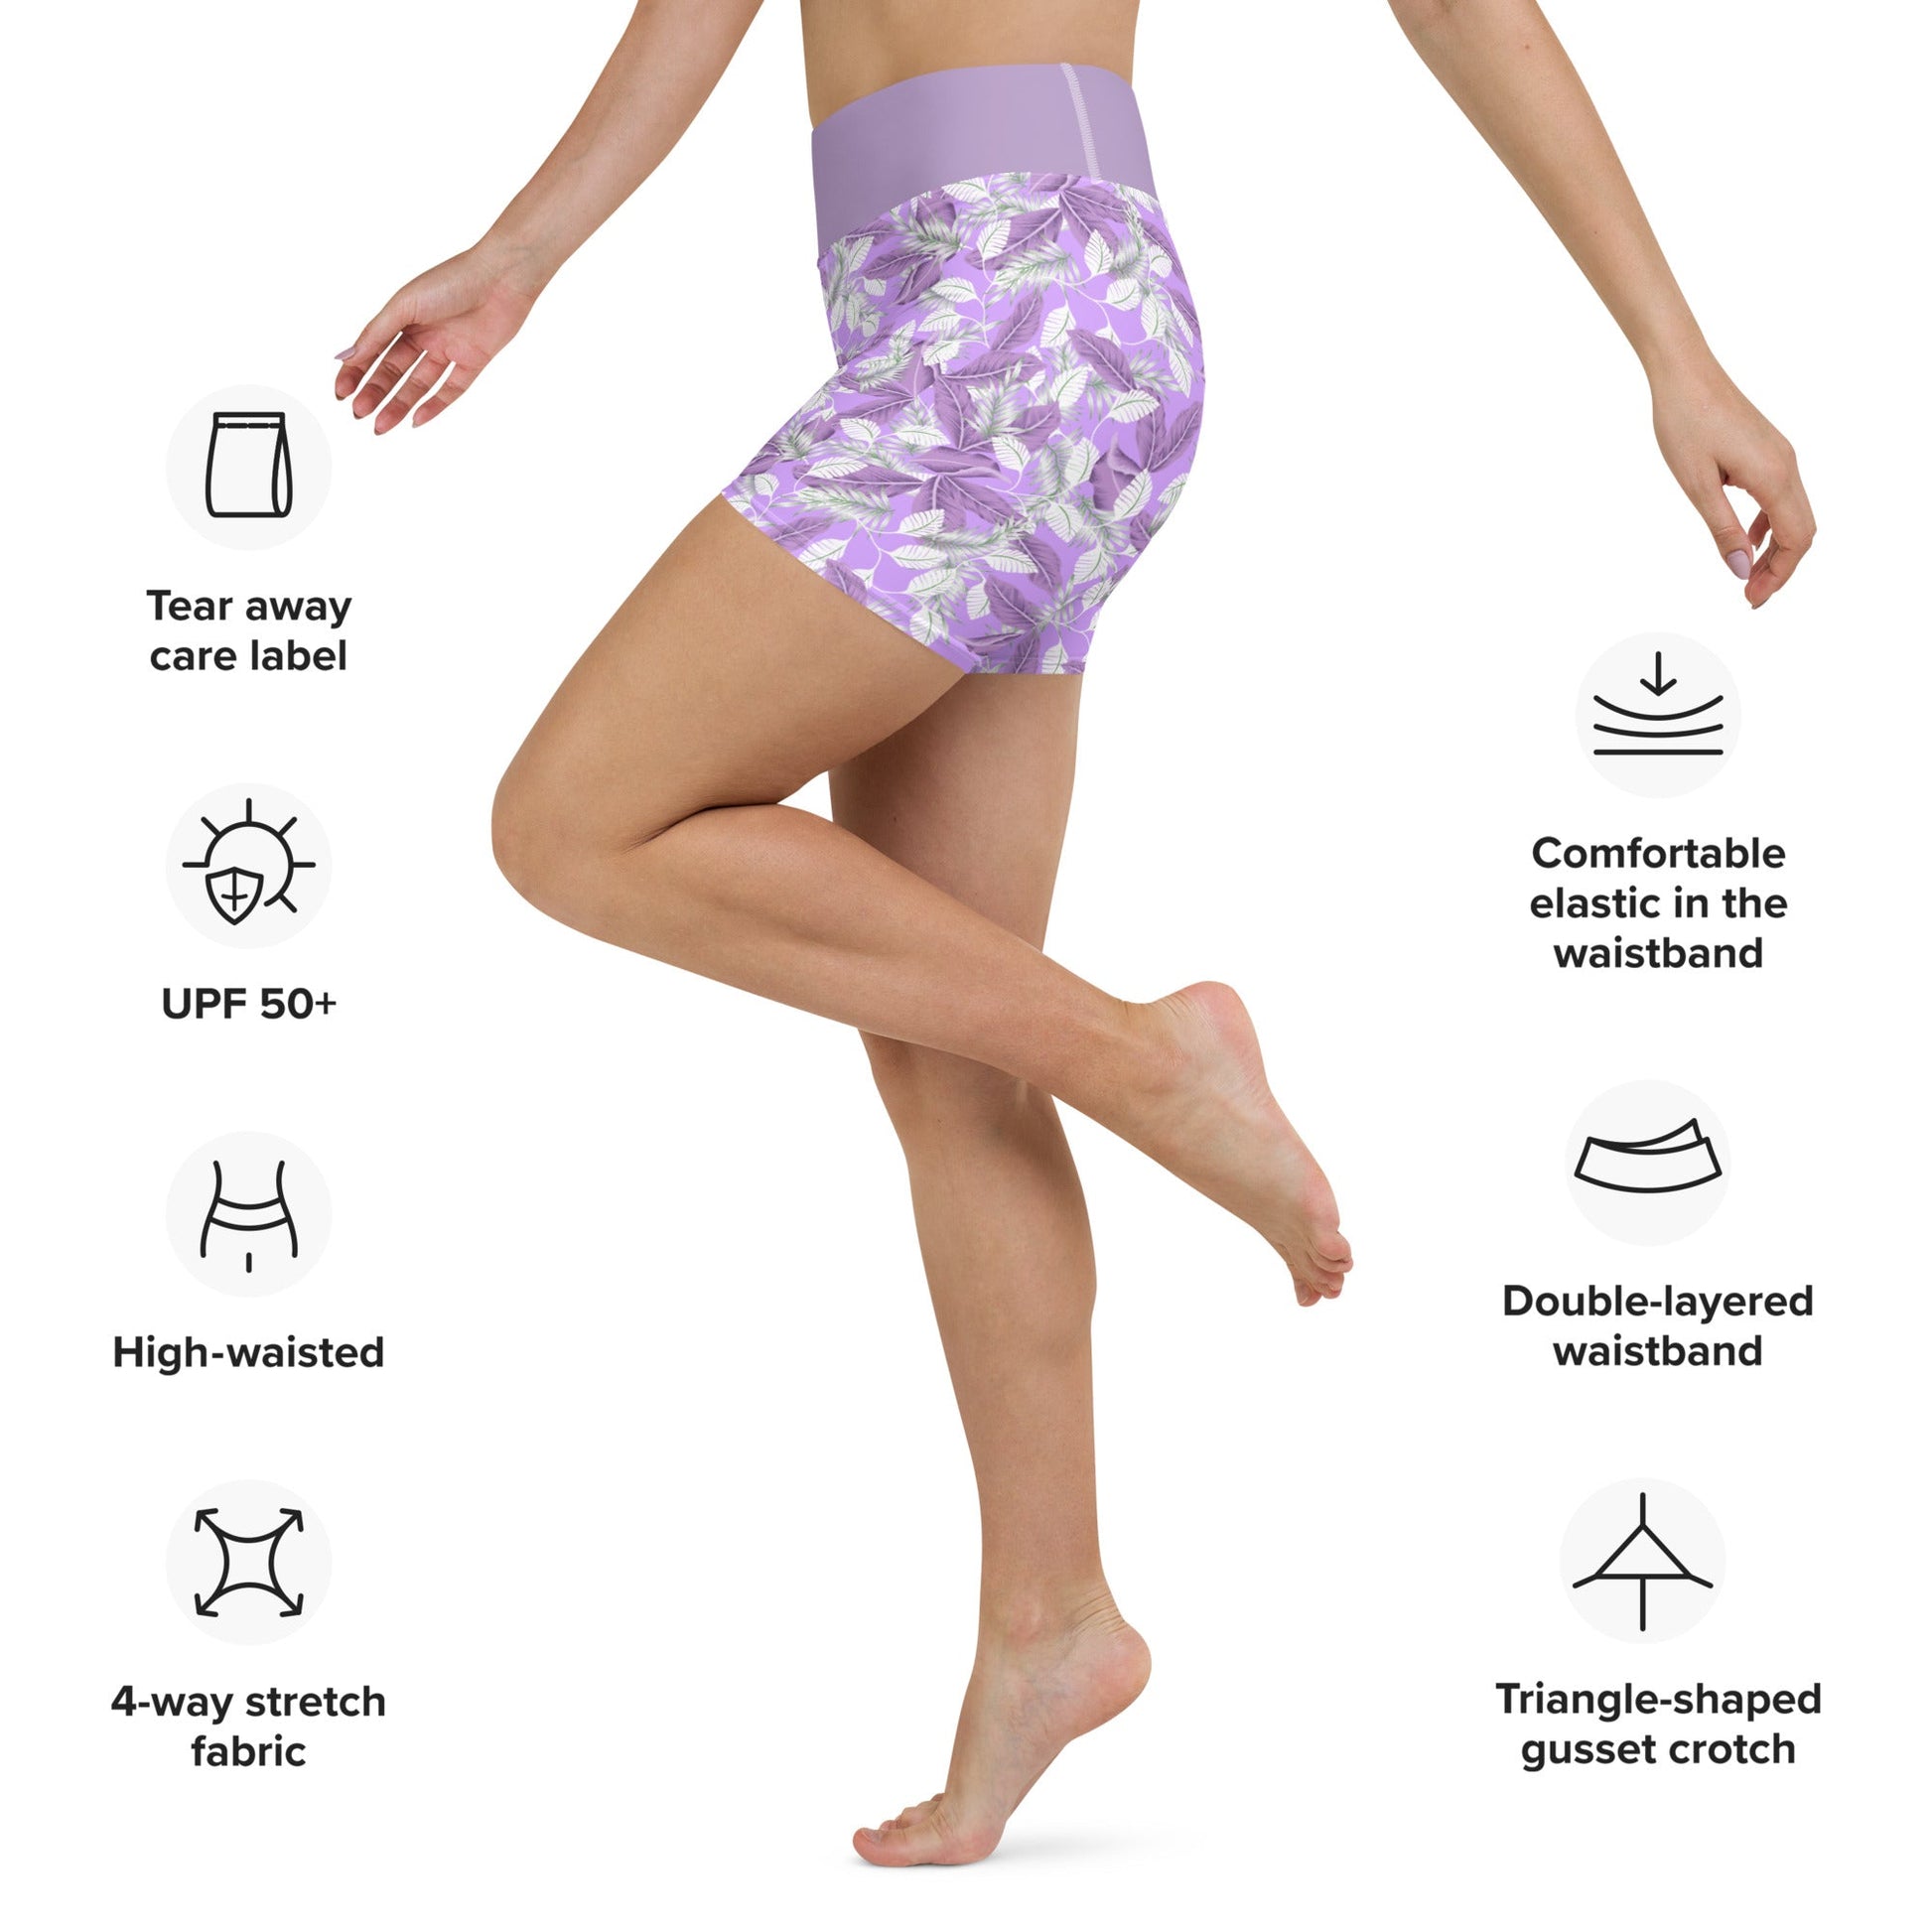 Be Extra! Floral Purple Yoga Shorts - BeExtra! Apparel & More